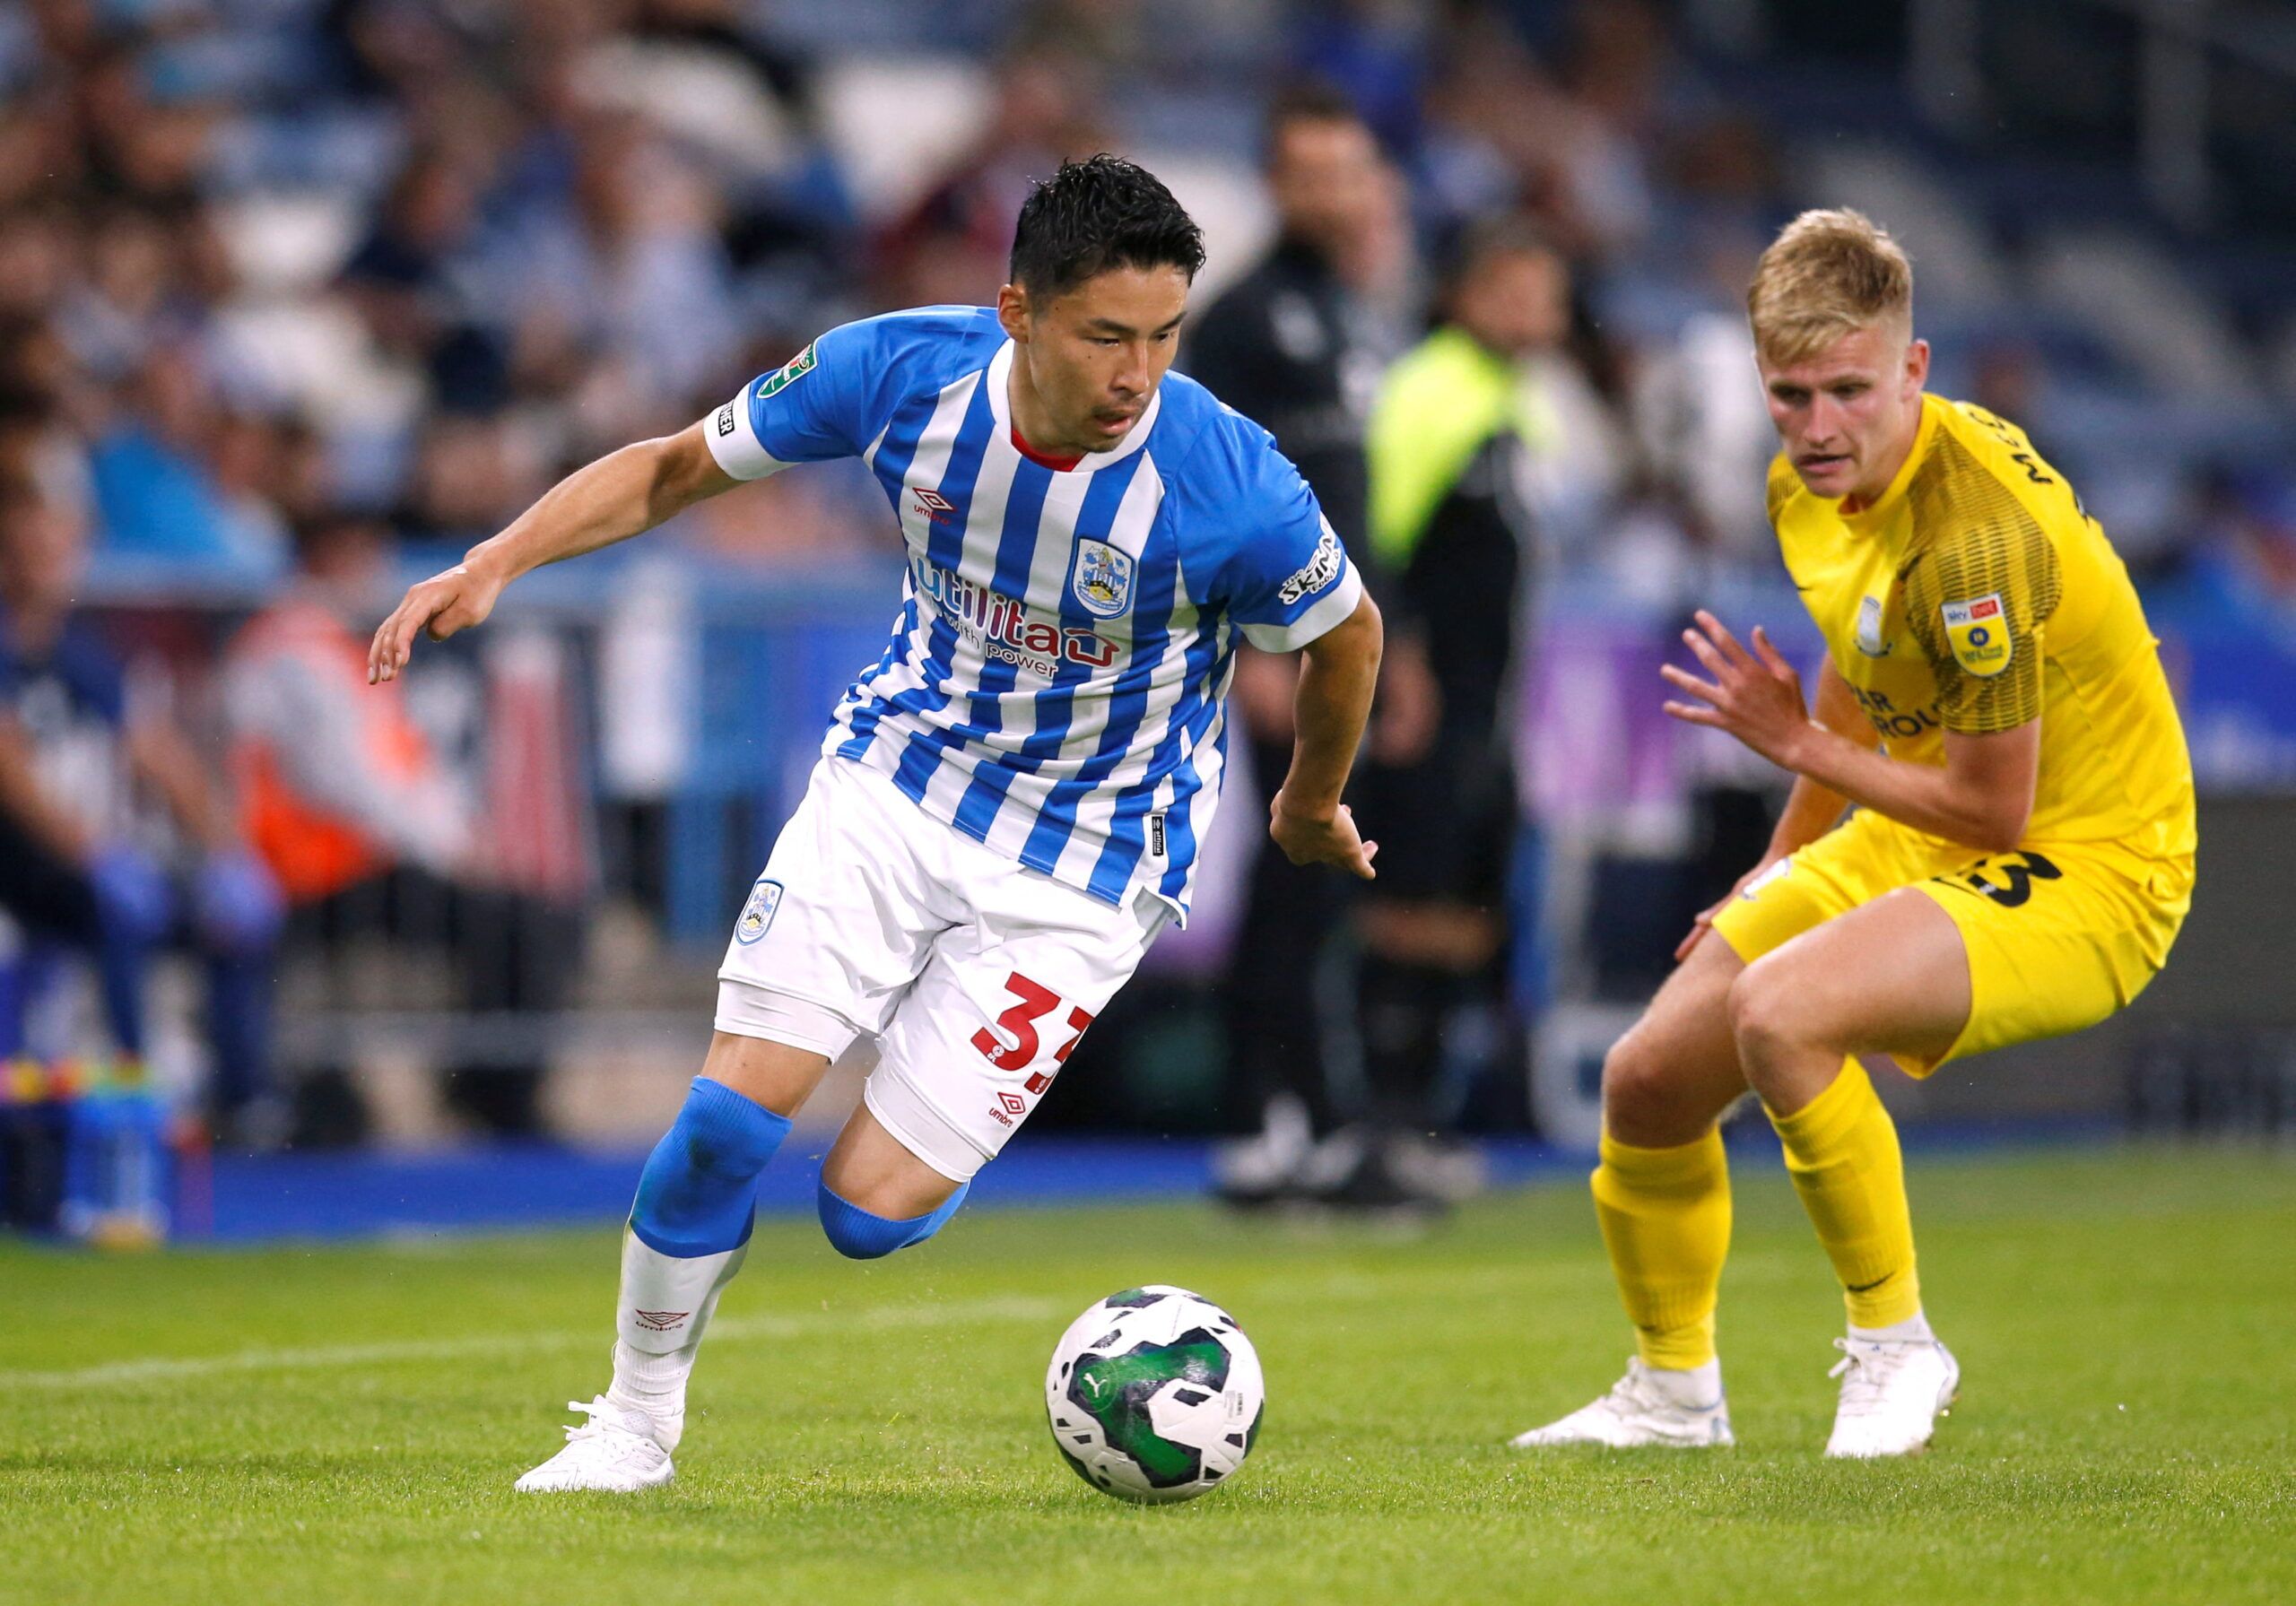 Soccer Football - Carabao Cup - Huddersfield Town v Preston North End - John Smith's Stadium, Huddersfield, Britain - August 9, 2022 Huddersfield Town's Yuta Nakayama in action with Preston North End's Ali McCann Action Images/Ed Sykes  EDITORIAL USE ONLY. No use with unauthorized audio, video, data, fixture lists, club/league logos or 